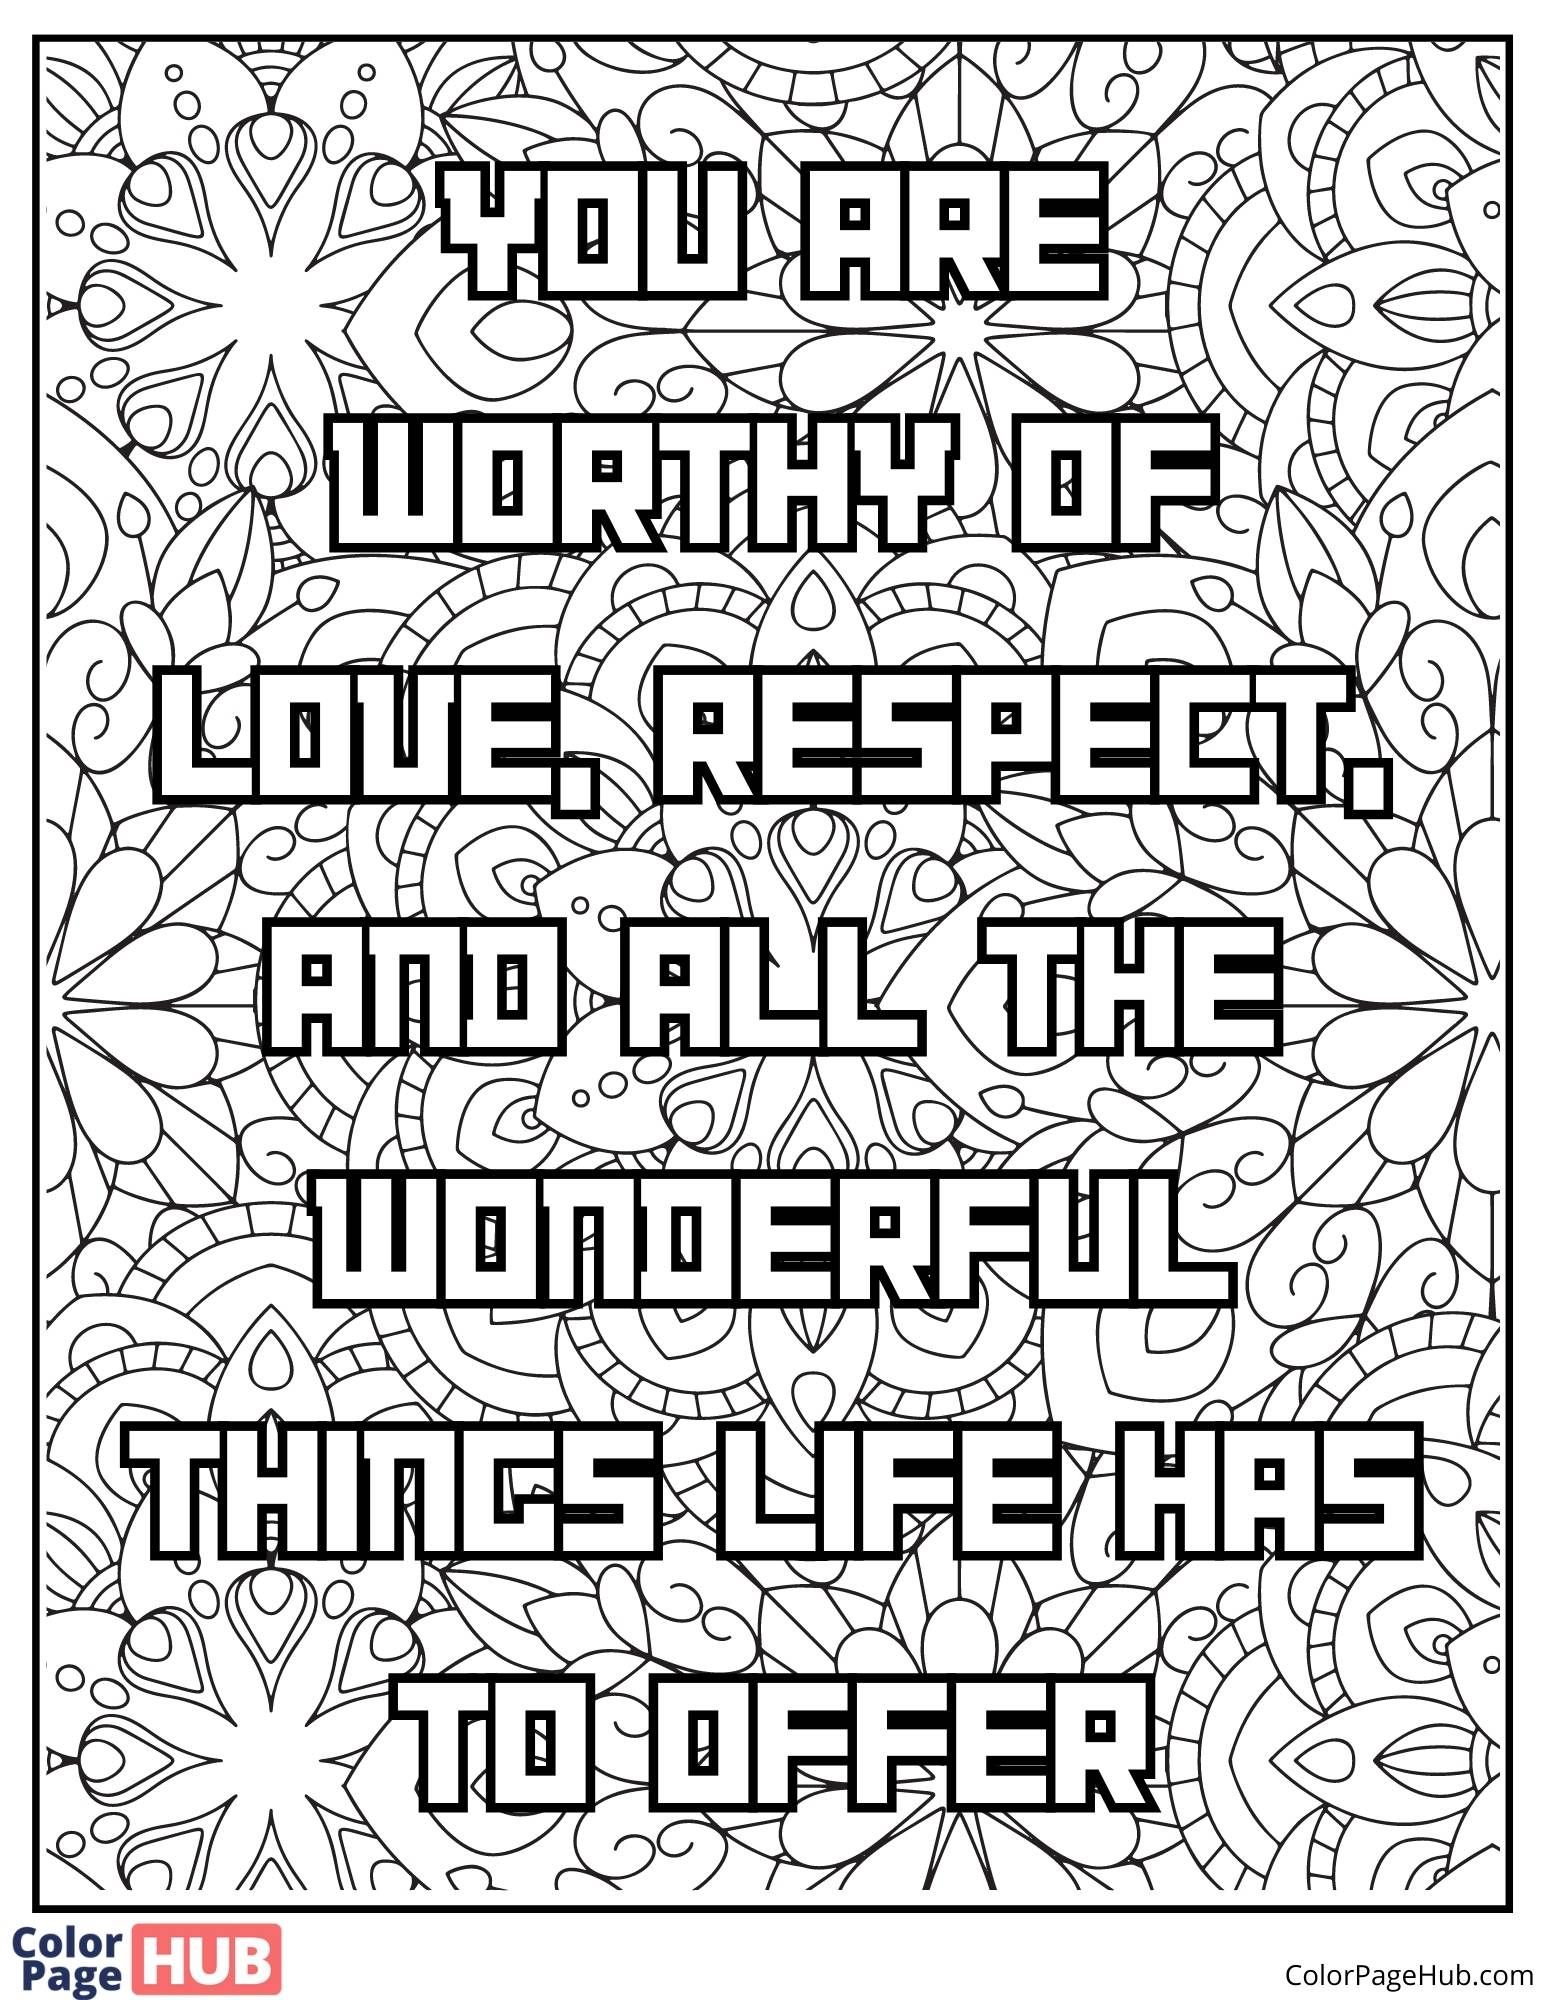 Affirmations coloring pages printable and free